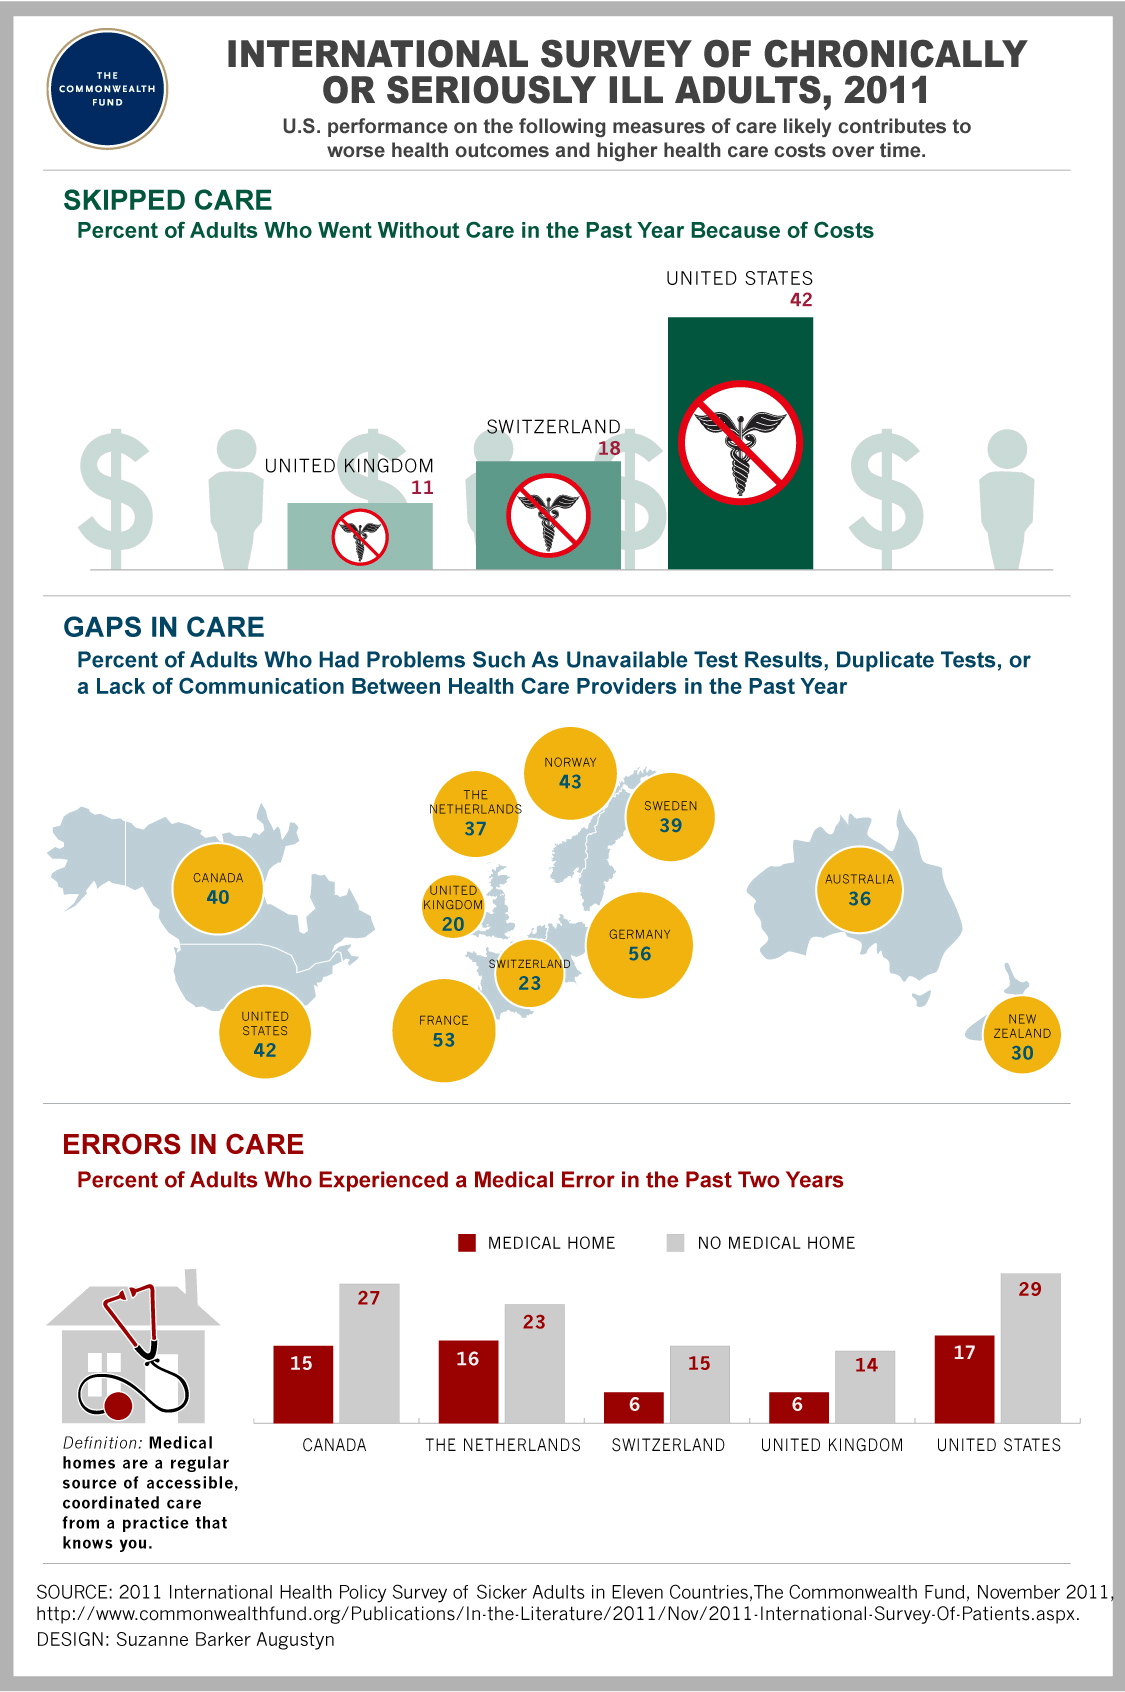 International Survey of Chronically or Seriously Ill Adults, 2011 Infographic